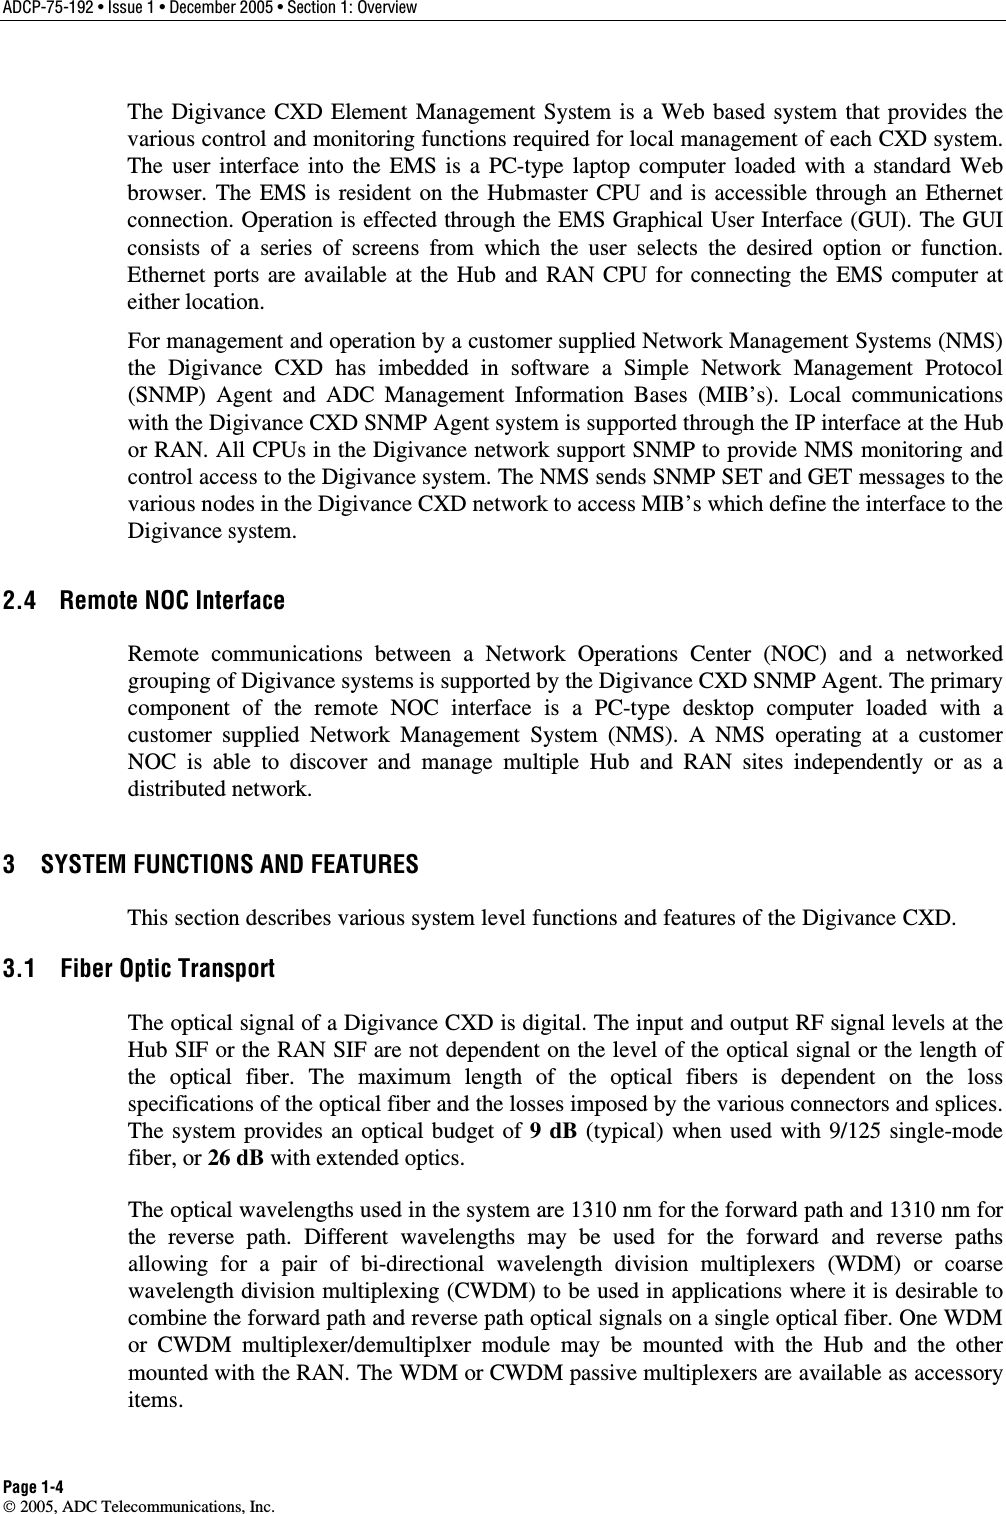 ADCP-75-192 • Issue 1 • December 2005 • Section 1: Overview Page 1-4  2005, ADC Telecommunications, Inc. The Digivance CXD Element Management System is a Web based system that provides the various control and monitoring functions required for local management of each CXD system. The user interface into the EMS is a PC-type laptop computer loaded with a standard Web browser. The EMS is resident on the Hubmaster CPU and is accessible through an Ethernet connection. Operation is effected through the EMS Graphical User Interface (GUI). The GUI consists of a series of screens from which the user selects the desired option or function. Ethernet ports are available at the Hub and RAN CPU for connecting the EMS computer at either location.  For management and operation by a customer supplied Network Management Systems (NMS) the Digivance CXD has imbedded in software a Simple Network Management Protocol (SNMP) Agent and ADC Management Information Bases (MIB’s). Local communications with the Digivance CXD SNMP Agent system is supported through the IP interface at the Hub or RAN. All CPUs in the Digivance network support SNMP to provide NMS monitoring and control access to the Digivance system. The NMS sends SNMP SET and GET messages to the various nodes in the Digivance CXD network to access MIB’s which define the interface to the Digivance system.  2.4  Remote NOC Interface Remote communications between a Network Operations Center (NOC) and a networked grouping of Digivance systems is supported by the Digivance CXD SNMP Agent. The primary component of the remote NOC interface is a PC-type desktop computer loaded with a customer supplied Network Management System (NMS). A NMS operating at a customer NOC is able to discover and manage multiple Hub and RAN sites independently or as a distributed network.  3  SYSTEM FUNCTIONS AND FEATURES This section describes various system level functions and features of the Digivance CXD.  3.1  Fiber Optic Transport The optical signal of a Digivance CXD is digital. The input and output RF signal levels at the Hub SIF or the RAN SIF are not dependent on the level of the optical signal or the length of the optical fiber. The maximum length of the optical fibers is dependent on the loss specifications of the optical fiber and the losses imposed by the various connectors and splices. The system provides an optical budget of 9 dB (typical) when used with 9/125 single-mode fiber, or 26 dB with extended optics.  The optical wavelengths used in the system are 1310 nm for the forward path and 1310 nm for the reverse path. Different wavelengths may be used for the forward and reverse paths allowing for a pair of bi-directional wavelength division multiplexers (WDM) or coarse wavelength division multiplexing (CWDM) to be used in applications where it is desirable to combine the forward path and reverse path optical signals on a single optical fiber. One WDM or CWDM multiplexer/demultiplxer module may be mounted with the Hub and the other mounted with the RAN. The WDM or CWDM passive multiplexers are available as accessory items.  